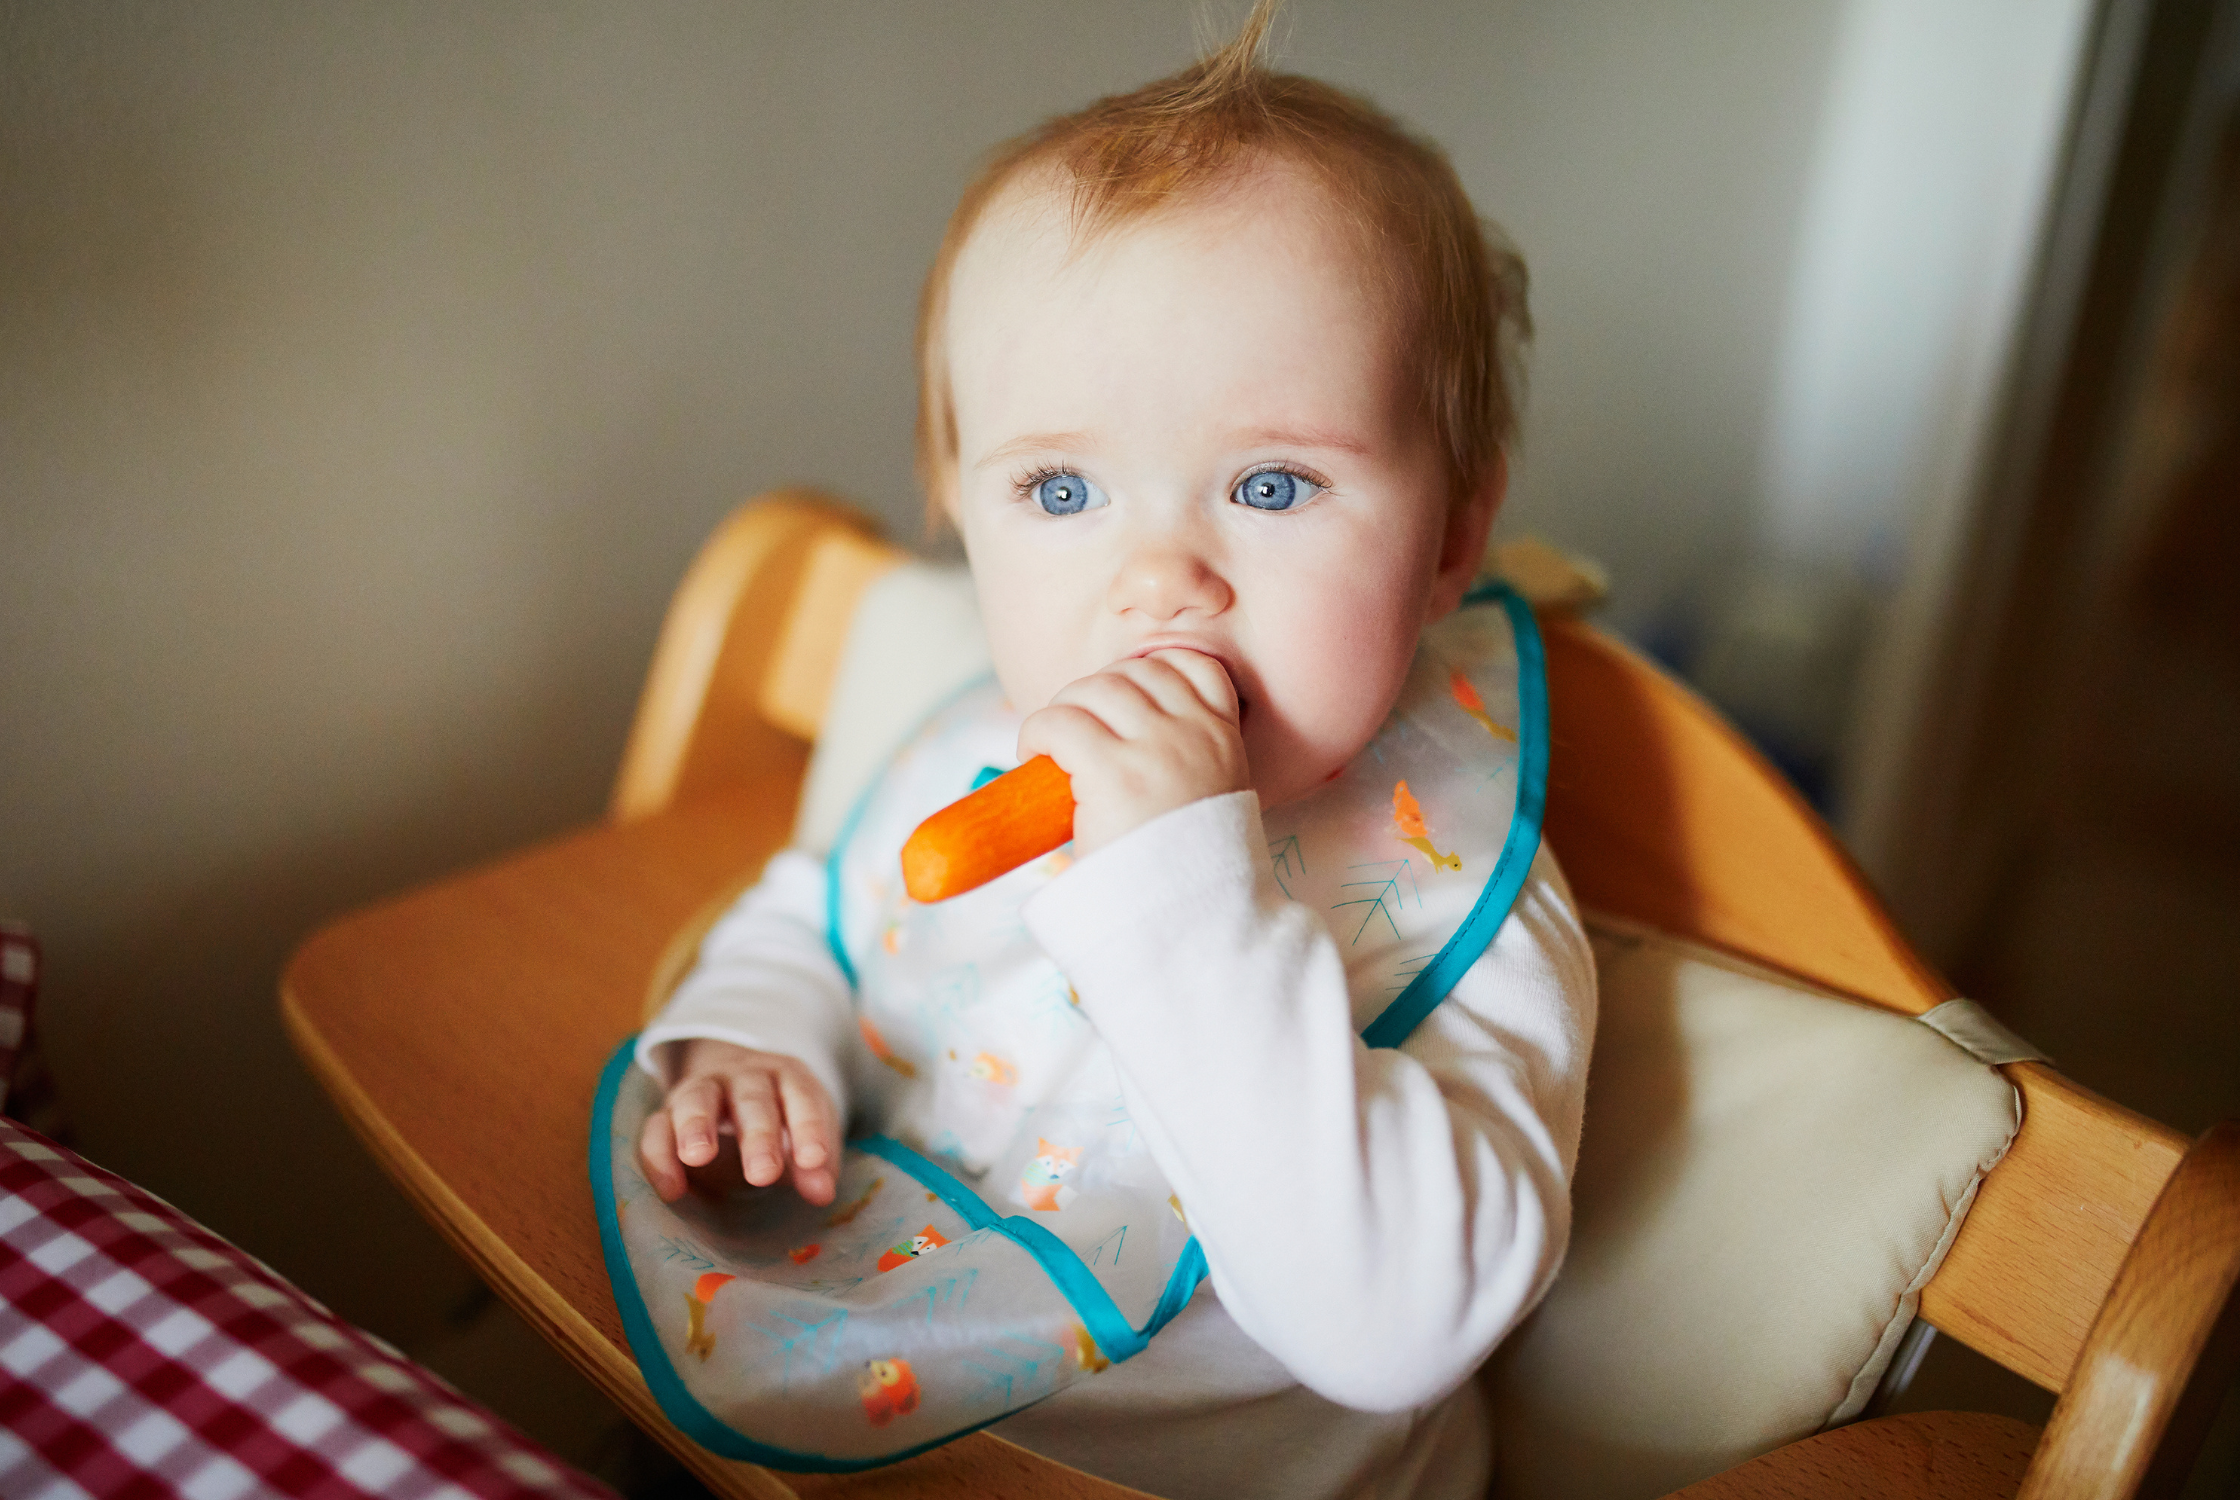 Baby-Led Weaning with Carrots – Sarah Remmer, RD